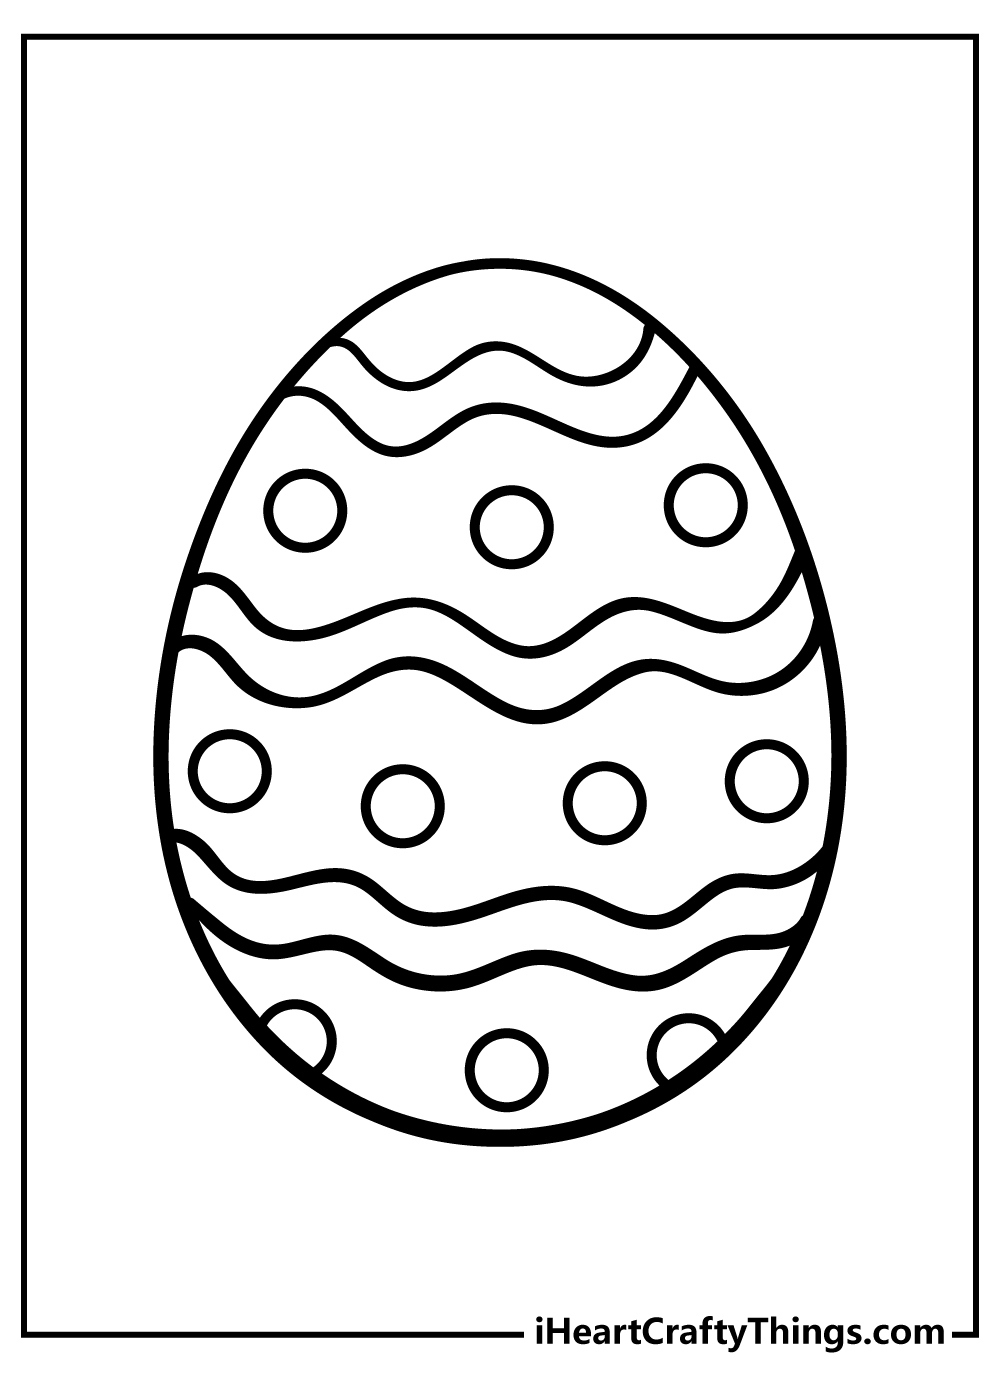 Easter Egg Coloring Pages (100% Free Printables) pertaining to Easter Egg Coloring Pages Free Printable